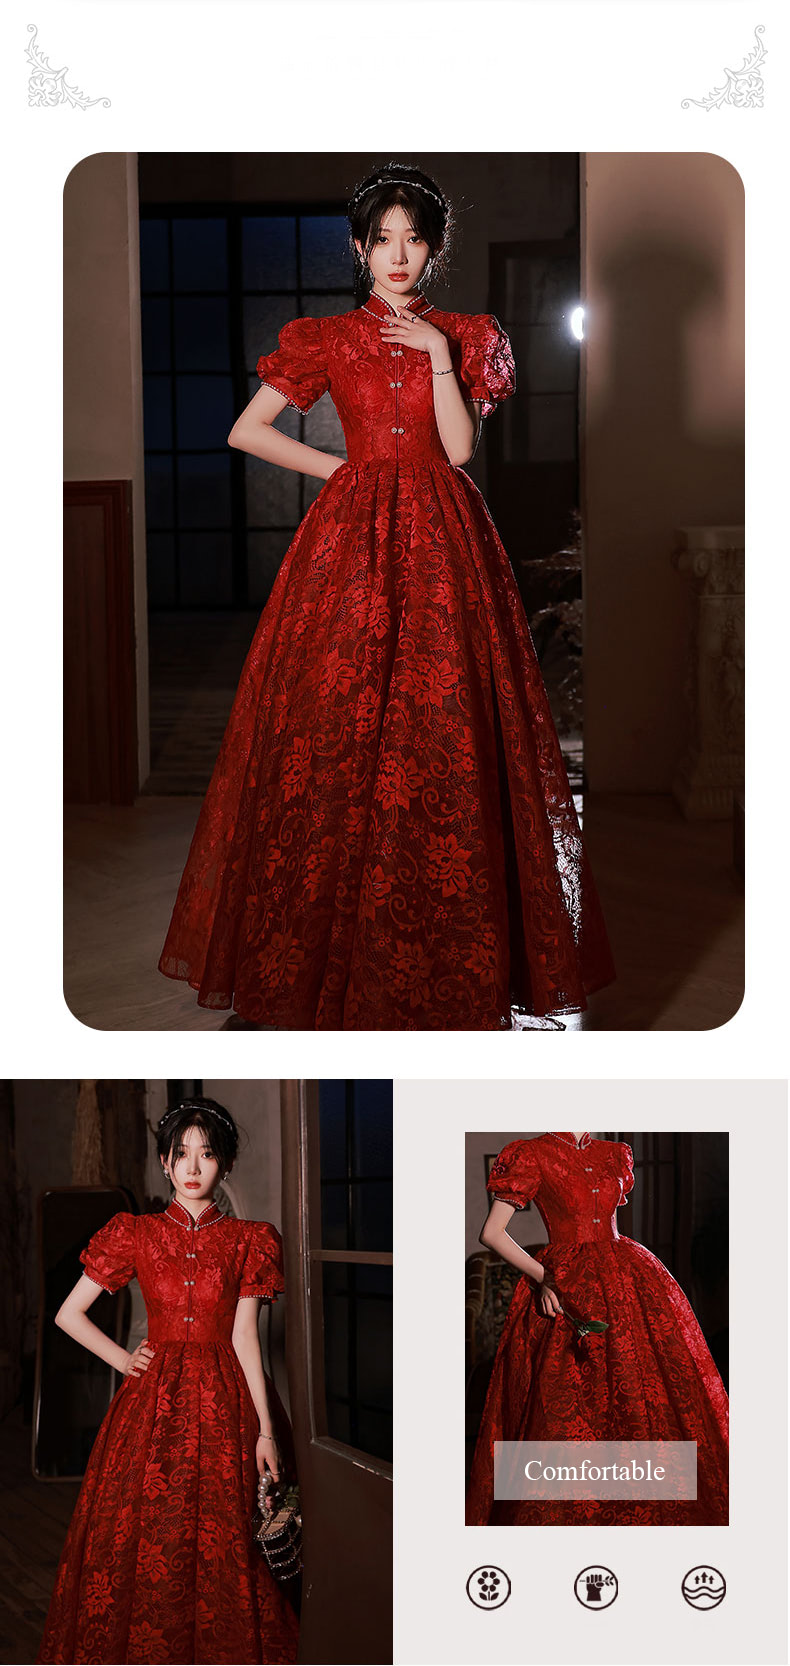 Aesthetic-Embroidered-Red-Prom-Dress-for-Wedding-Banquet-Party08.jpg